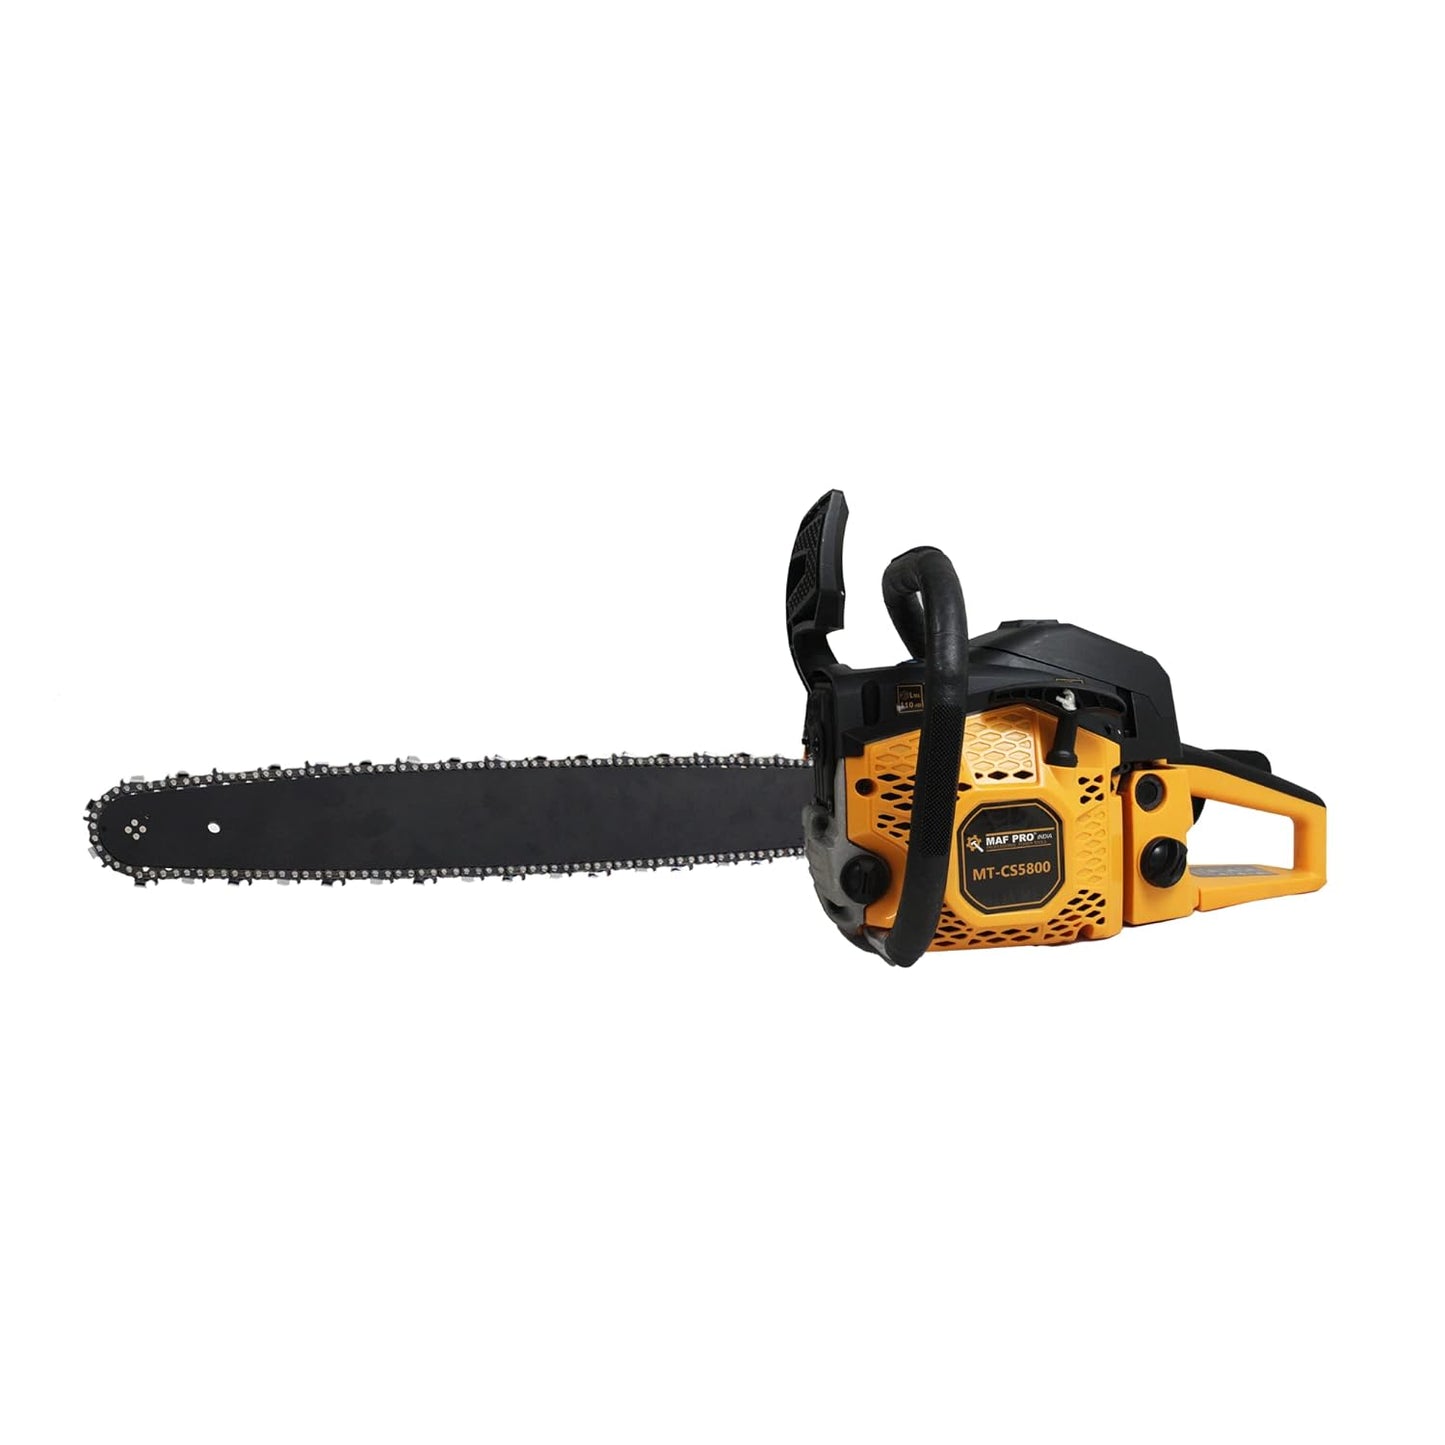 MAF PRO MT-CS5800, 22" 58CC Powerful 2 Stroke Handheld Petrol Chain Saw, Woodcutting Saw for Farm, Garden and Ranch with Tool Kit